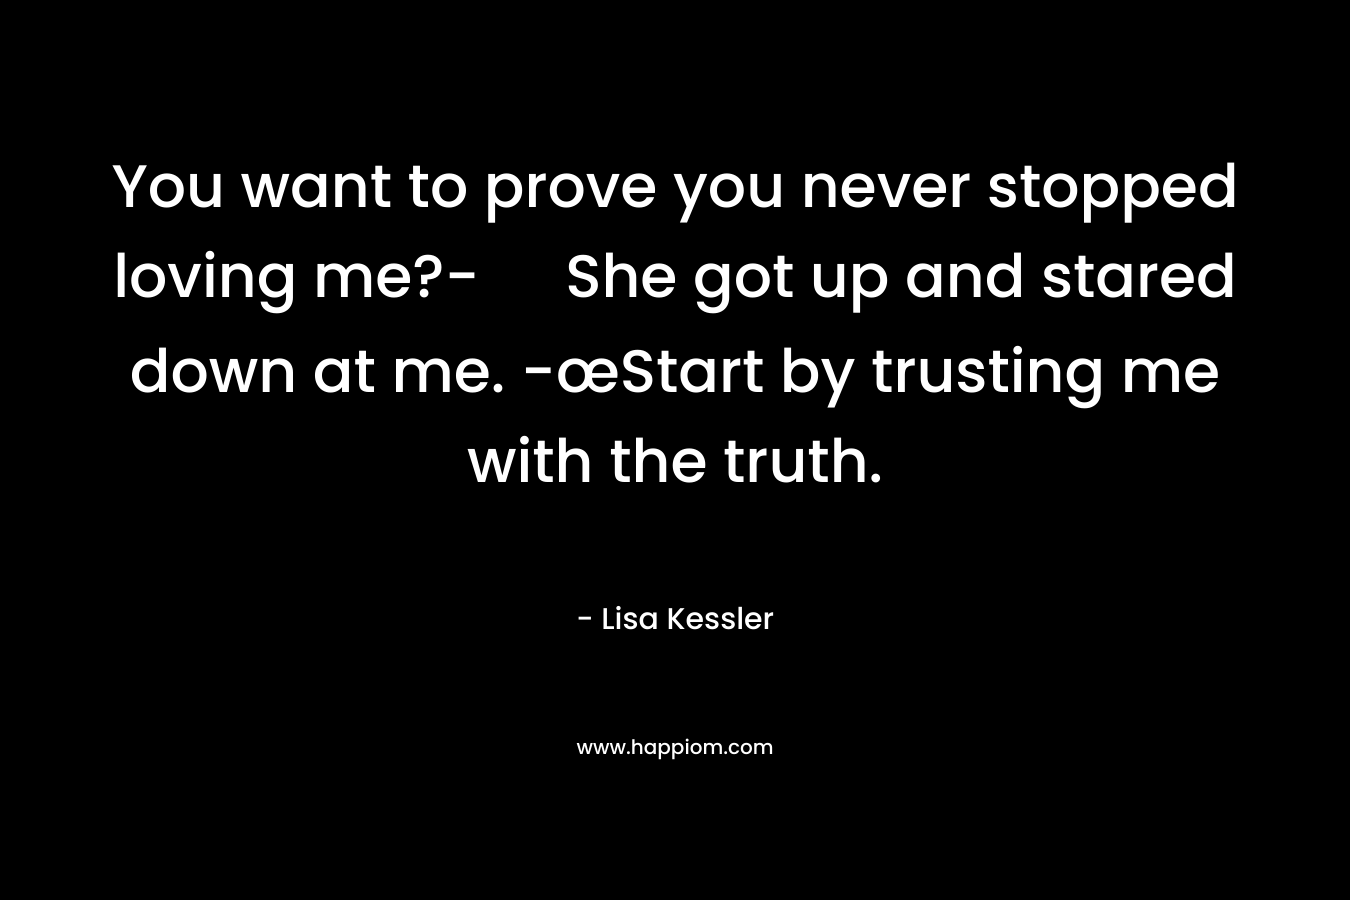 You want to prove you never stopped loving me?- She got up and stared down at me. -œStart by trusting me with the truth. – Lisa Kessler